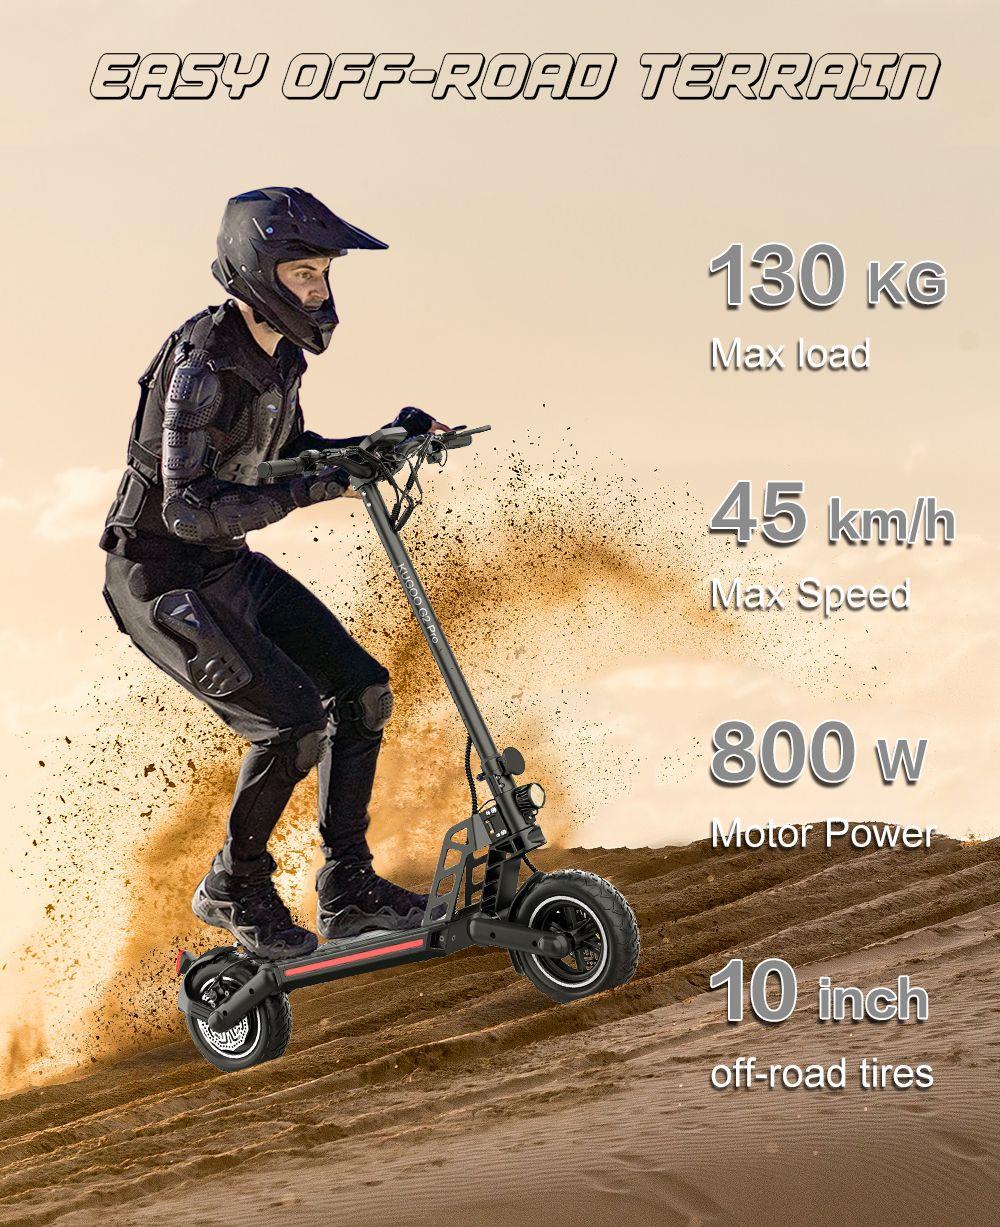 KUGOO G2 PRO Foldable Electric Scooter -800W Brushless Motor & 15Ah Lithium Battery